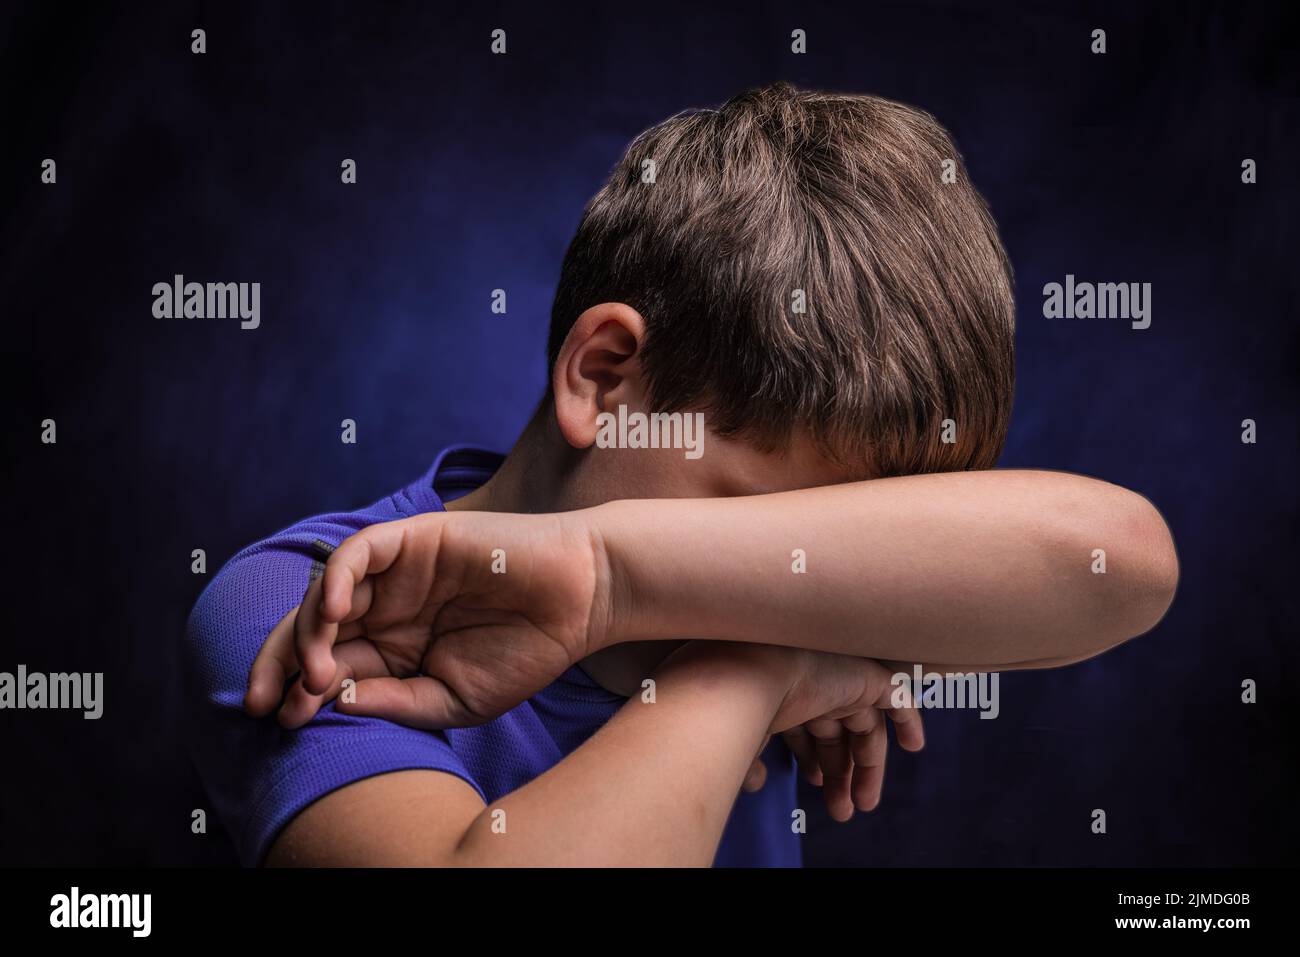 Sad european teenage boy with light brown hair in sports purple t-shirt covering his face with one hand over isolated background Stock Photo